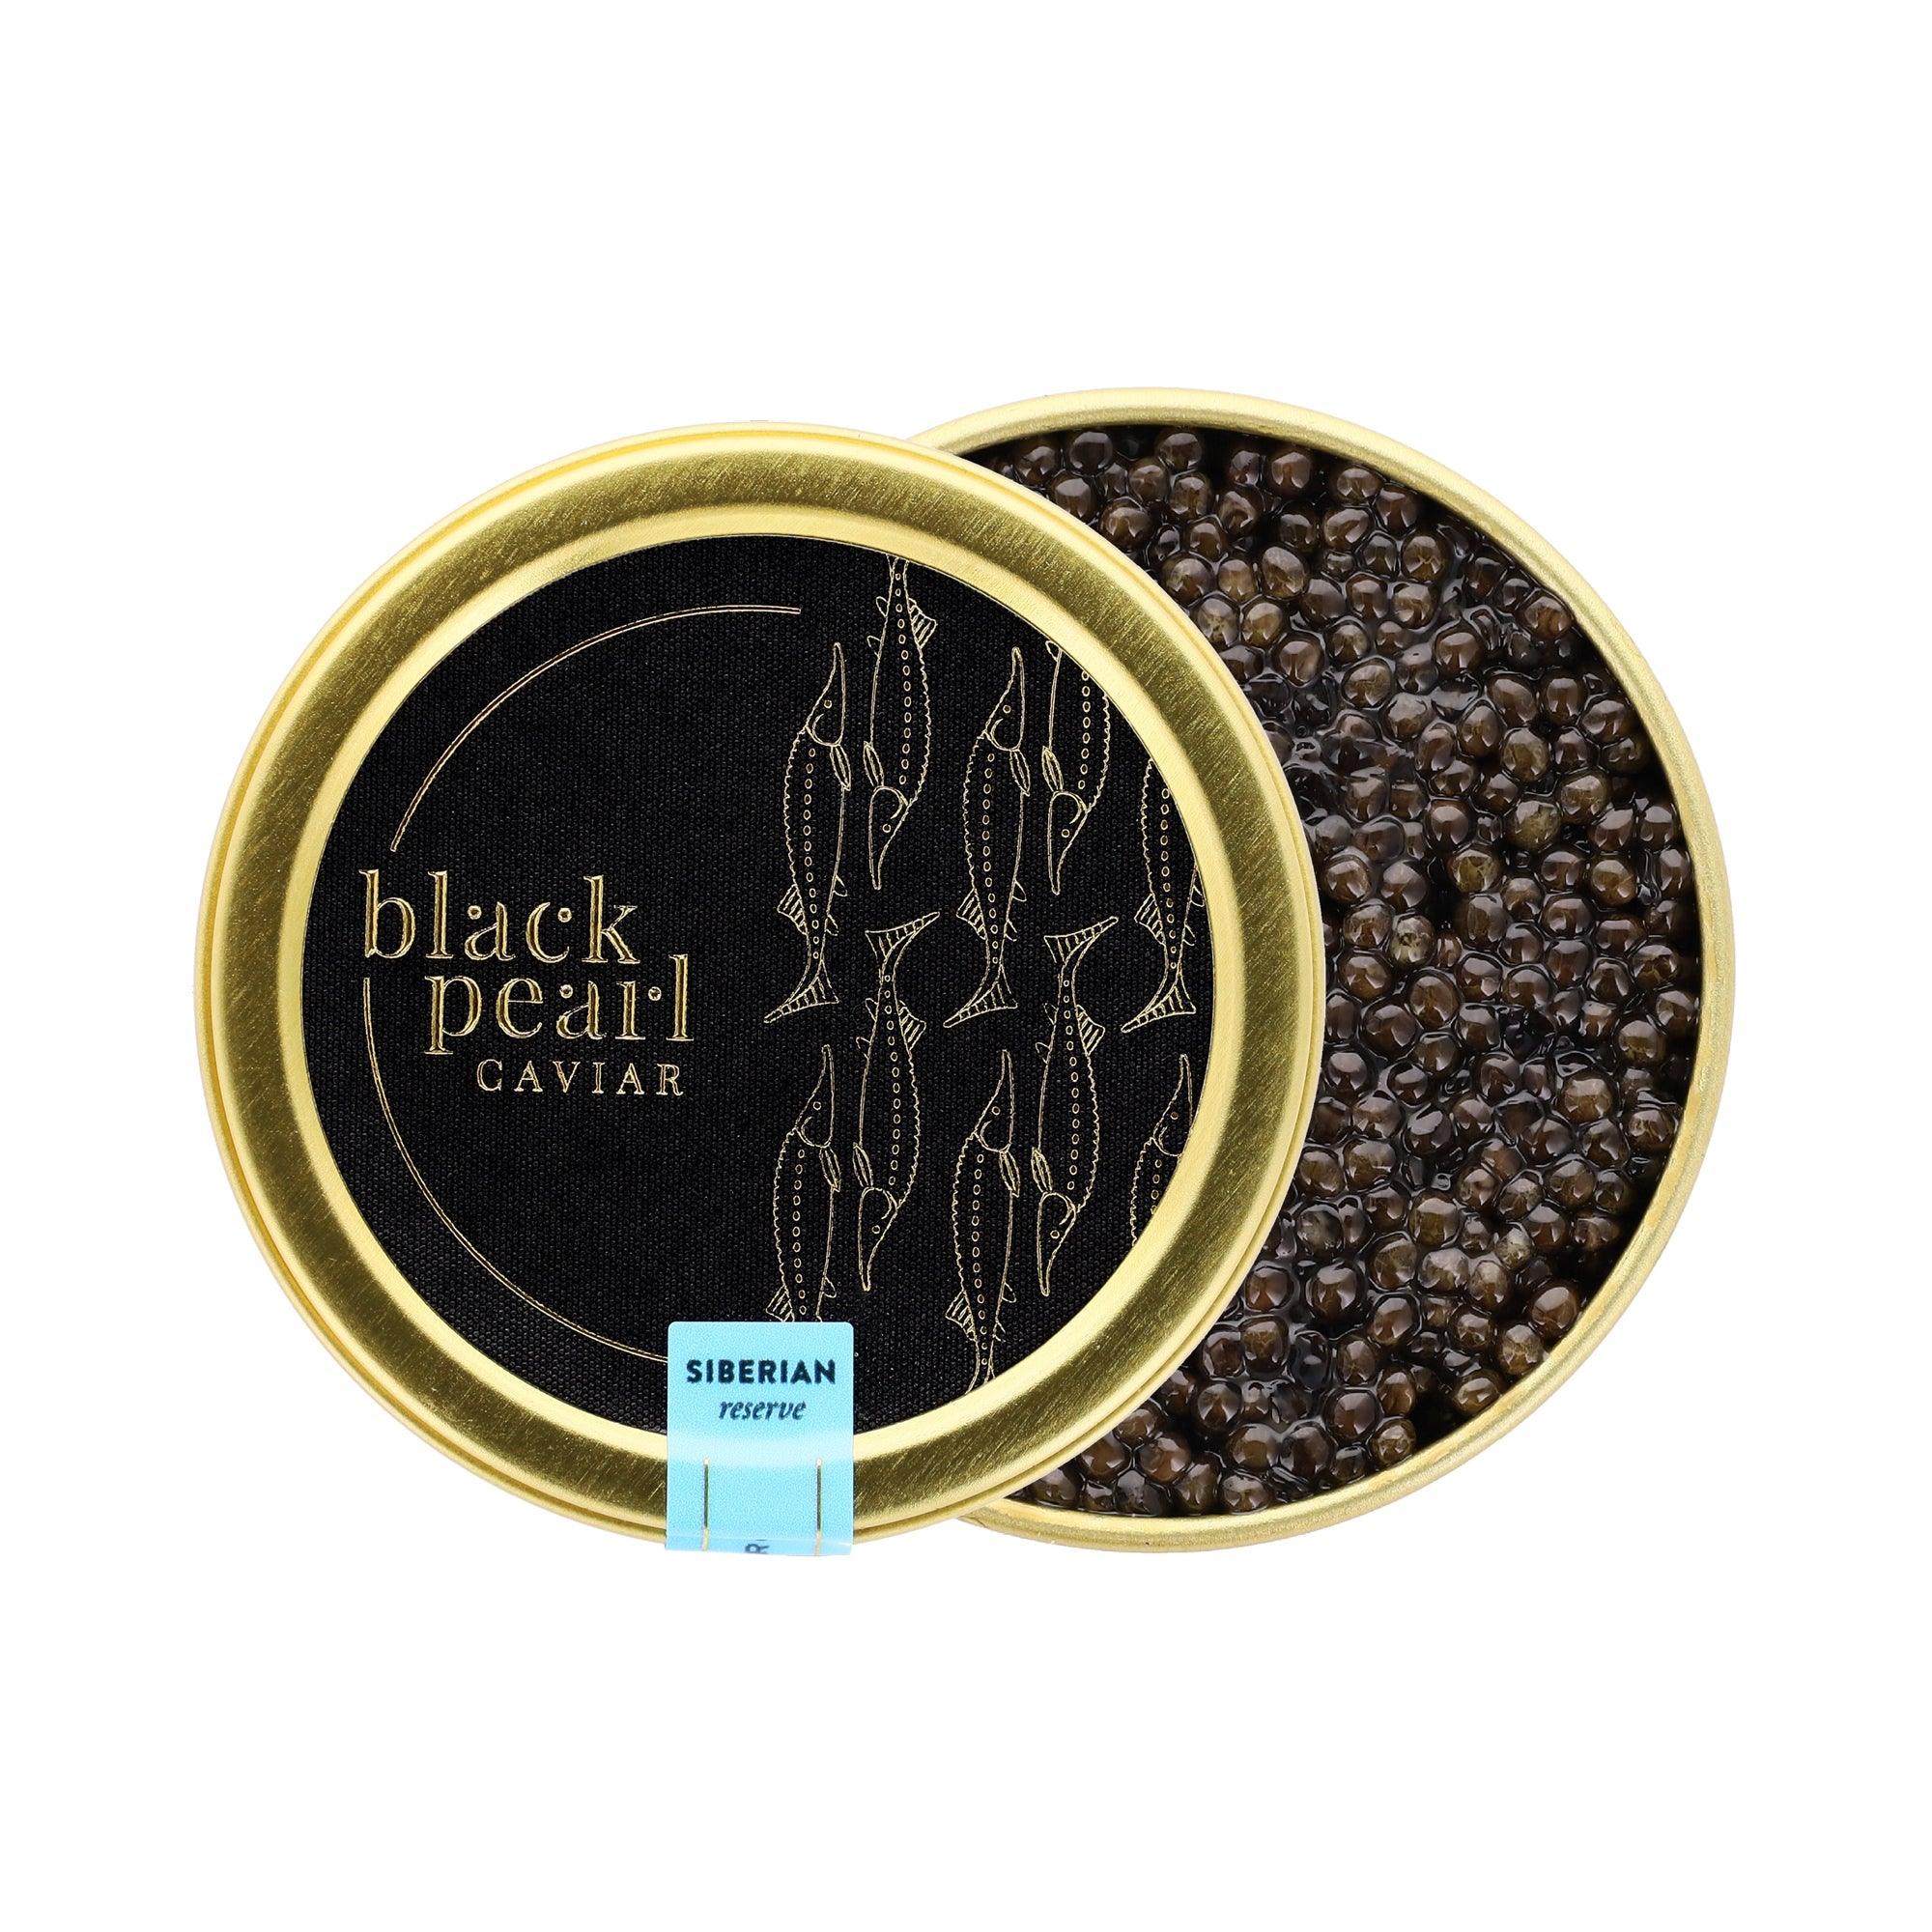 small dark to green caviar, strong flavors, clean taste, one of our best-seller